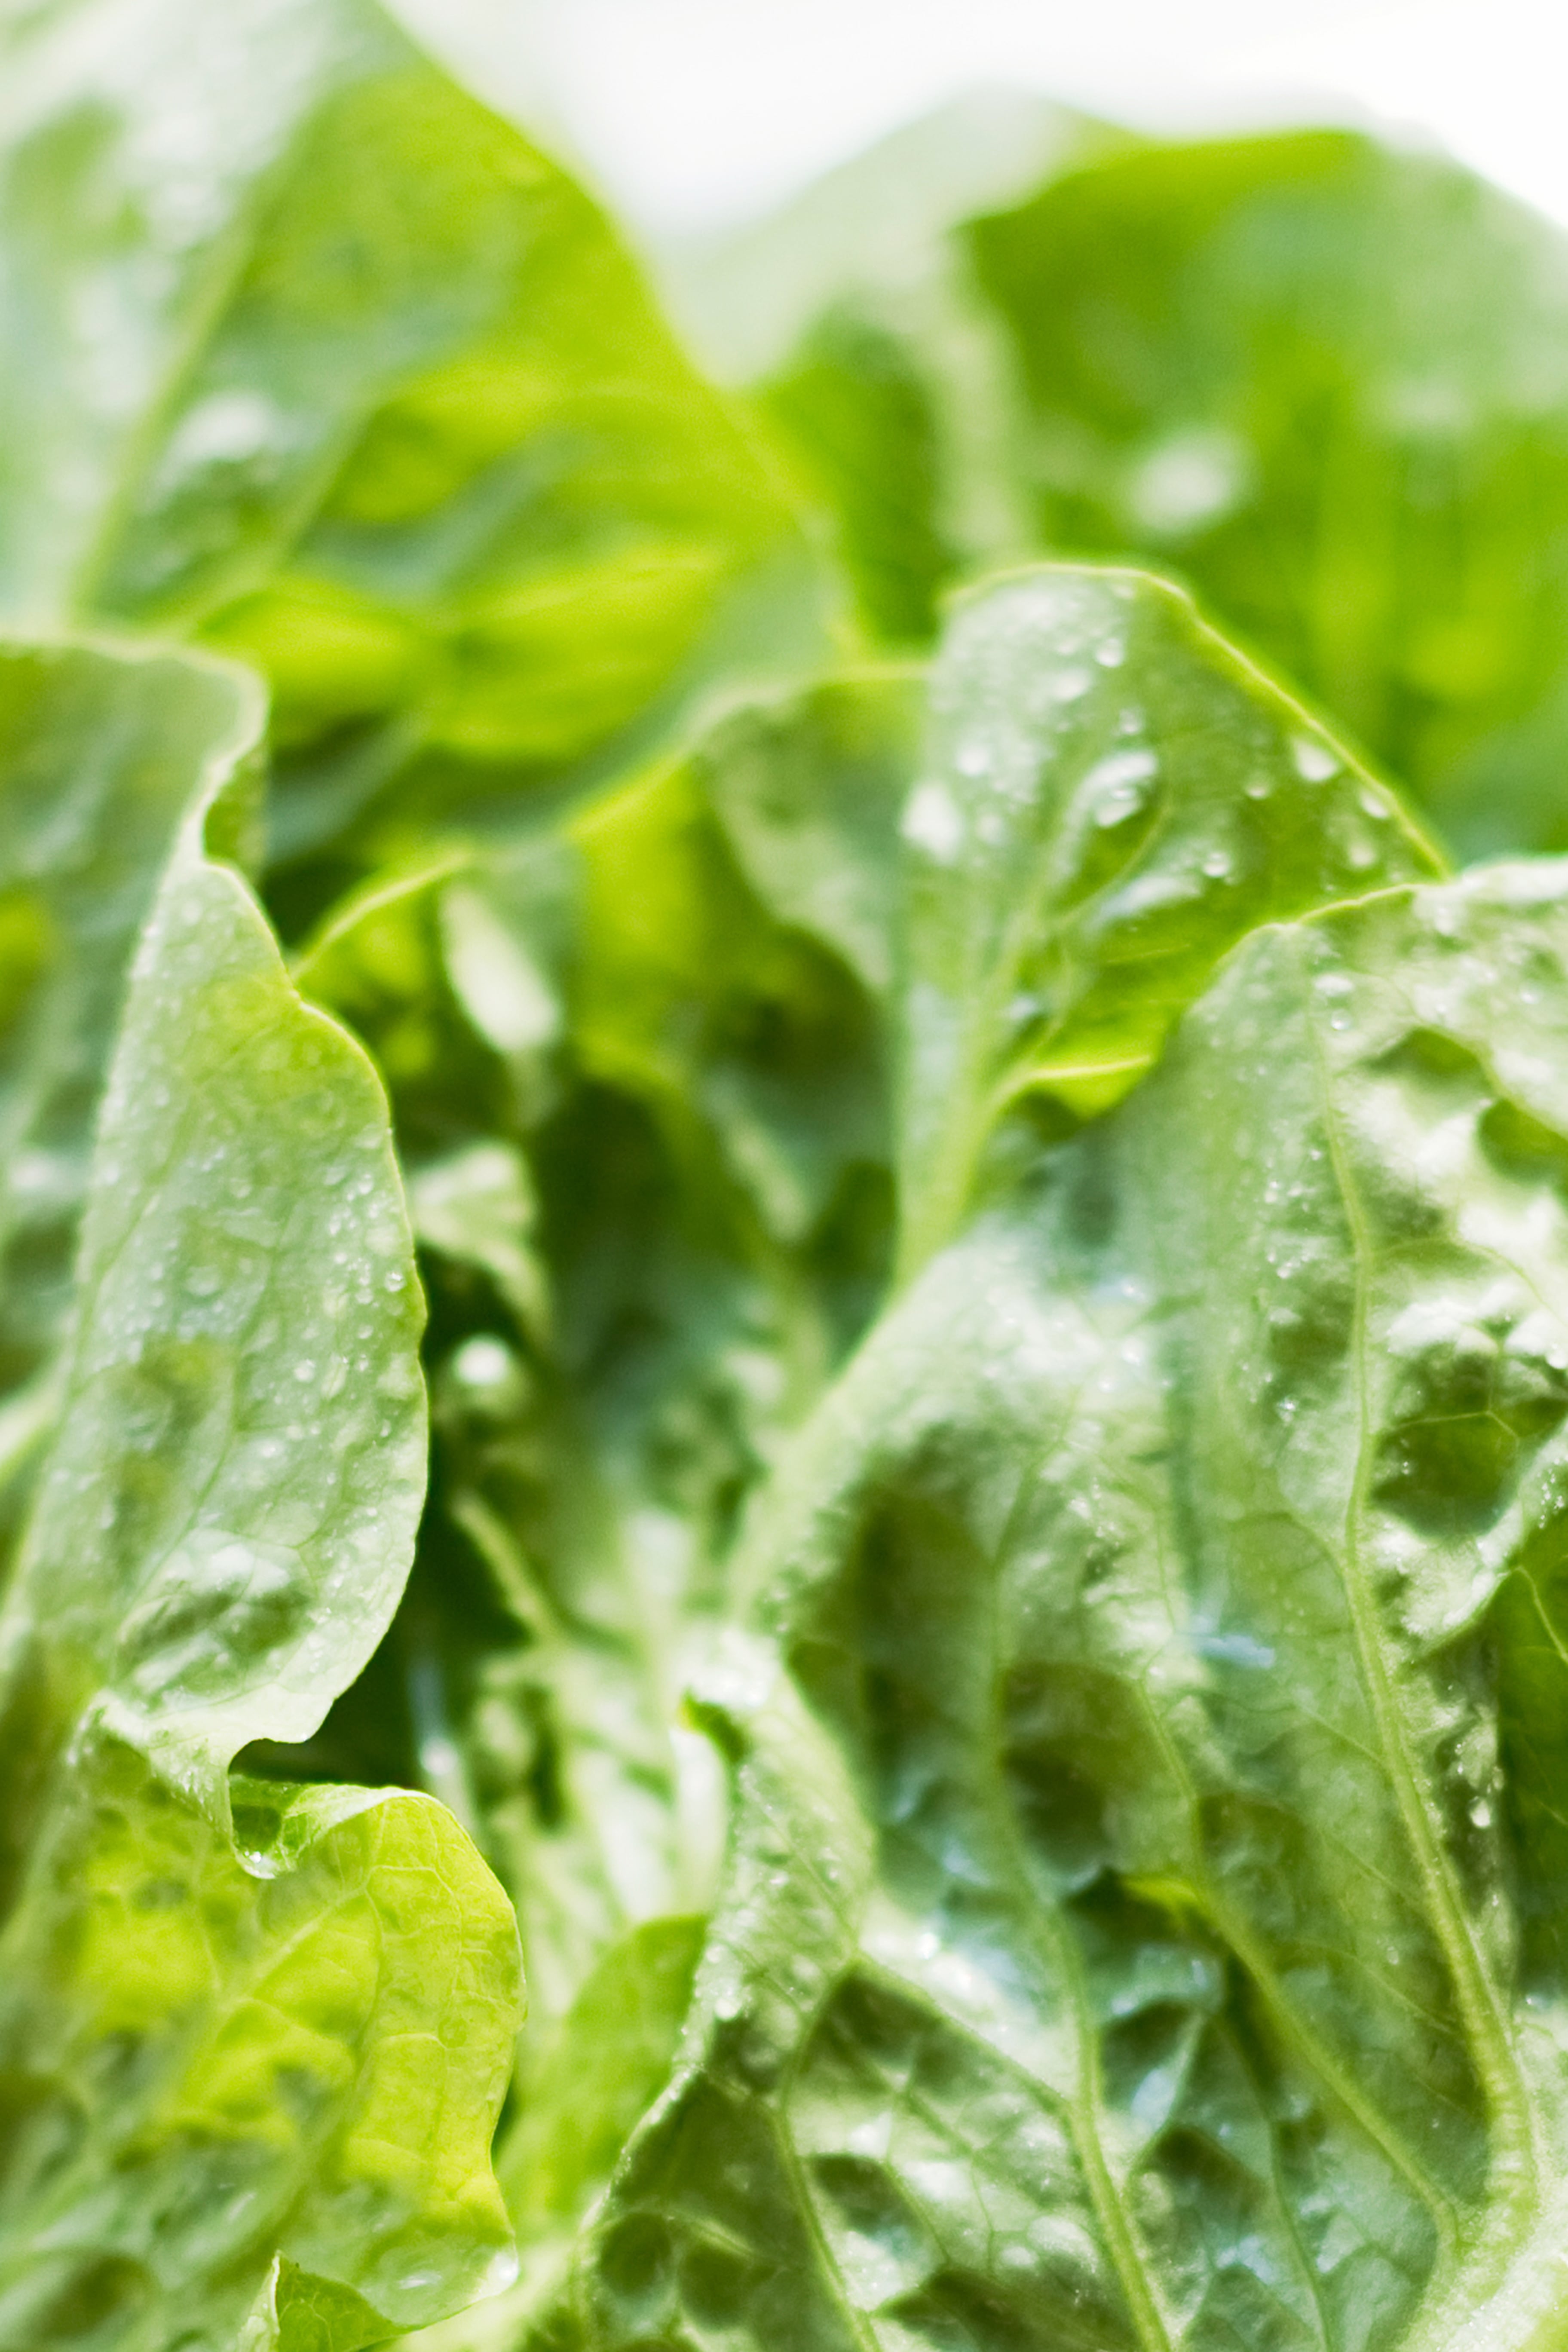 Does Drinking Lettuce Water Really Help You Fall Asleep Faster? An Expert Explains